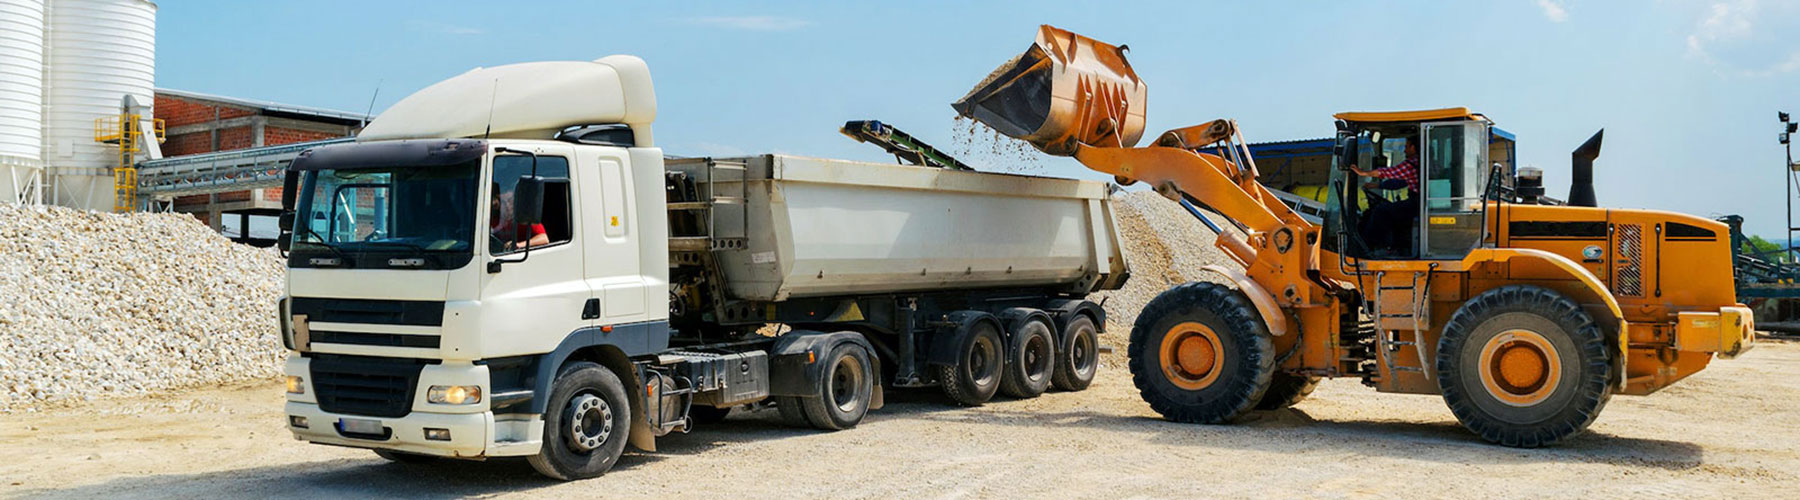 loader vehicle loading material into white cargo truck